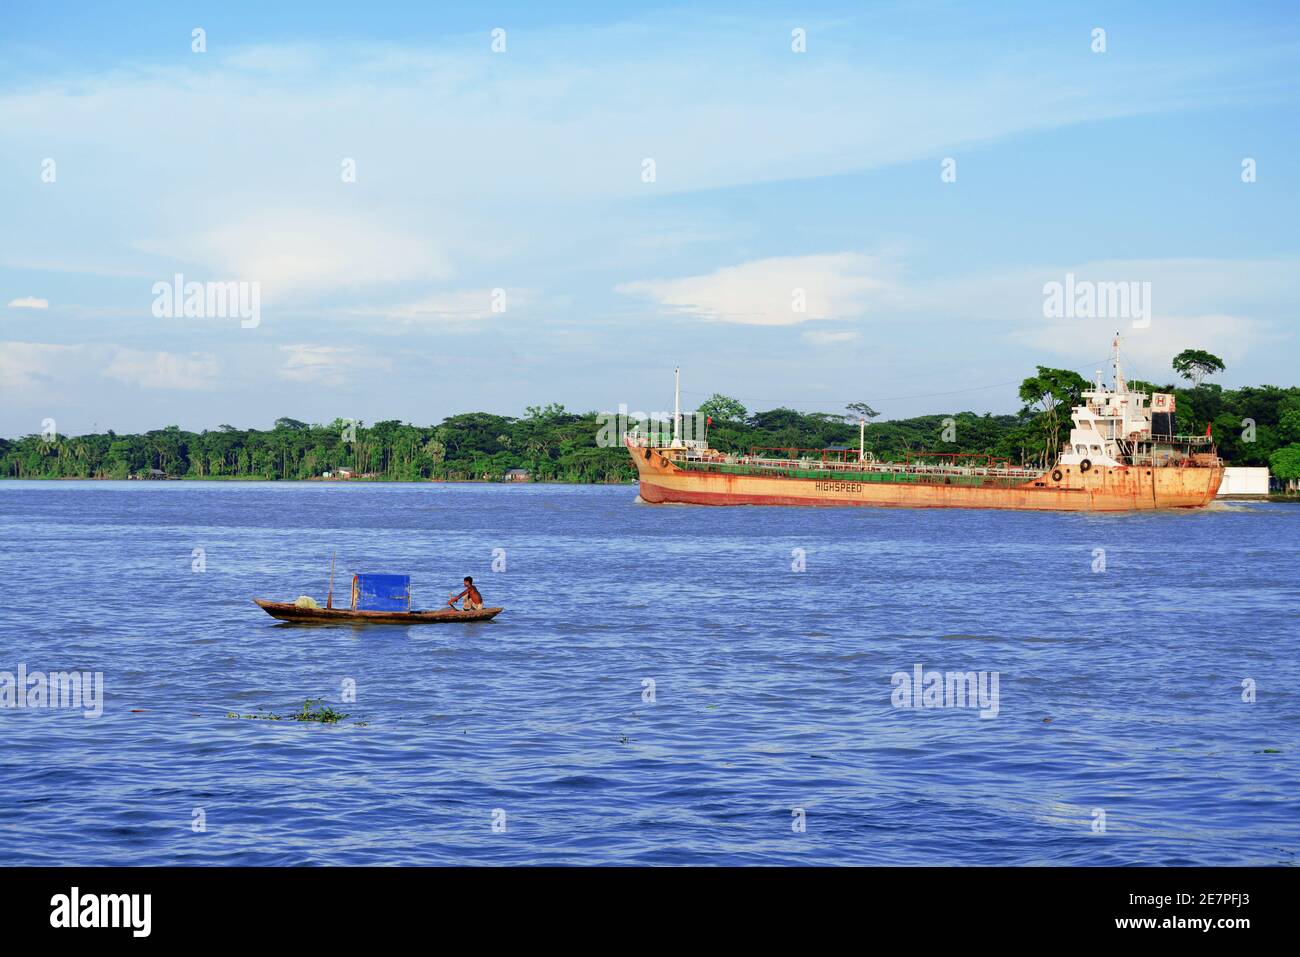 Small boats and cargo ships are going on the Kirtankhola river Stock Photo